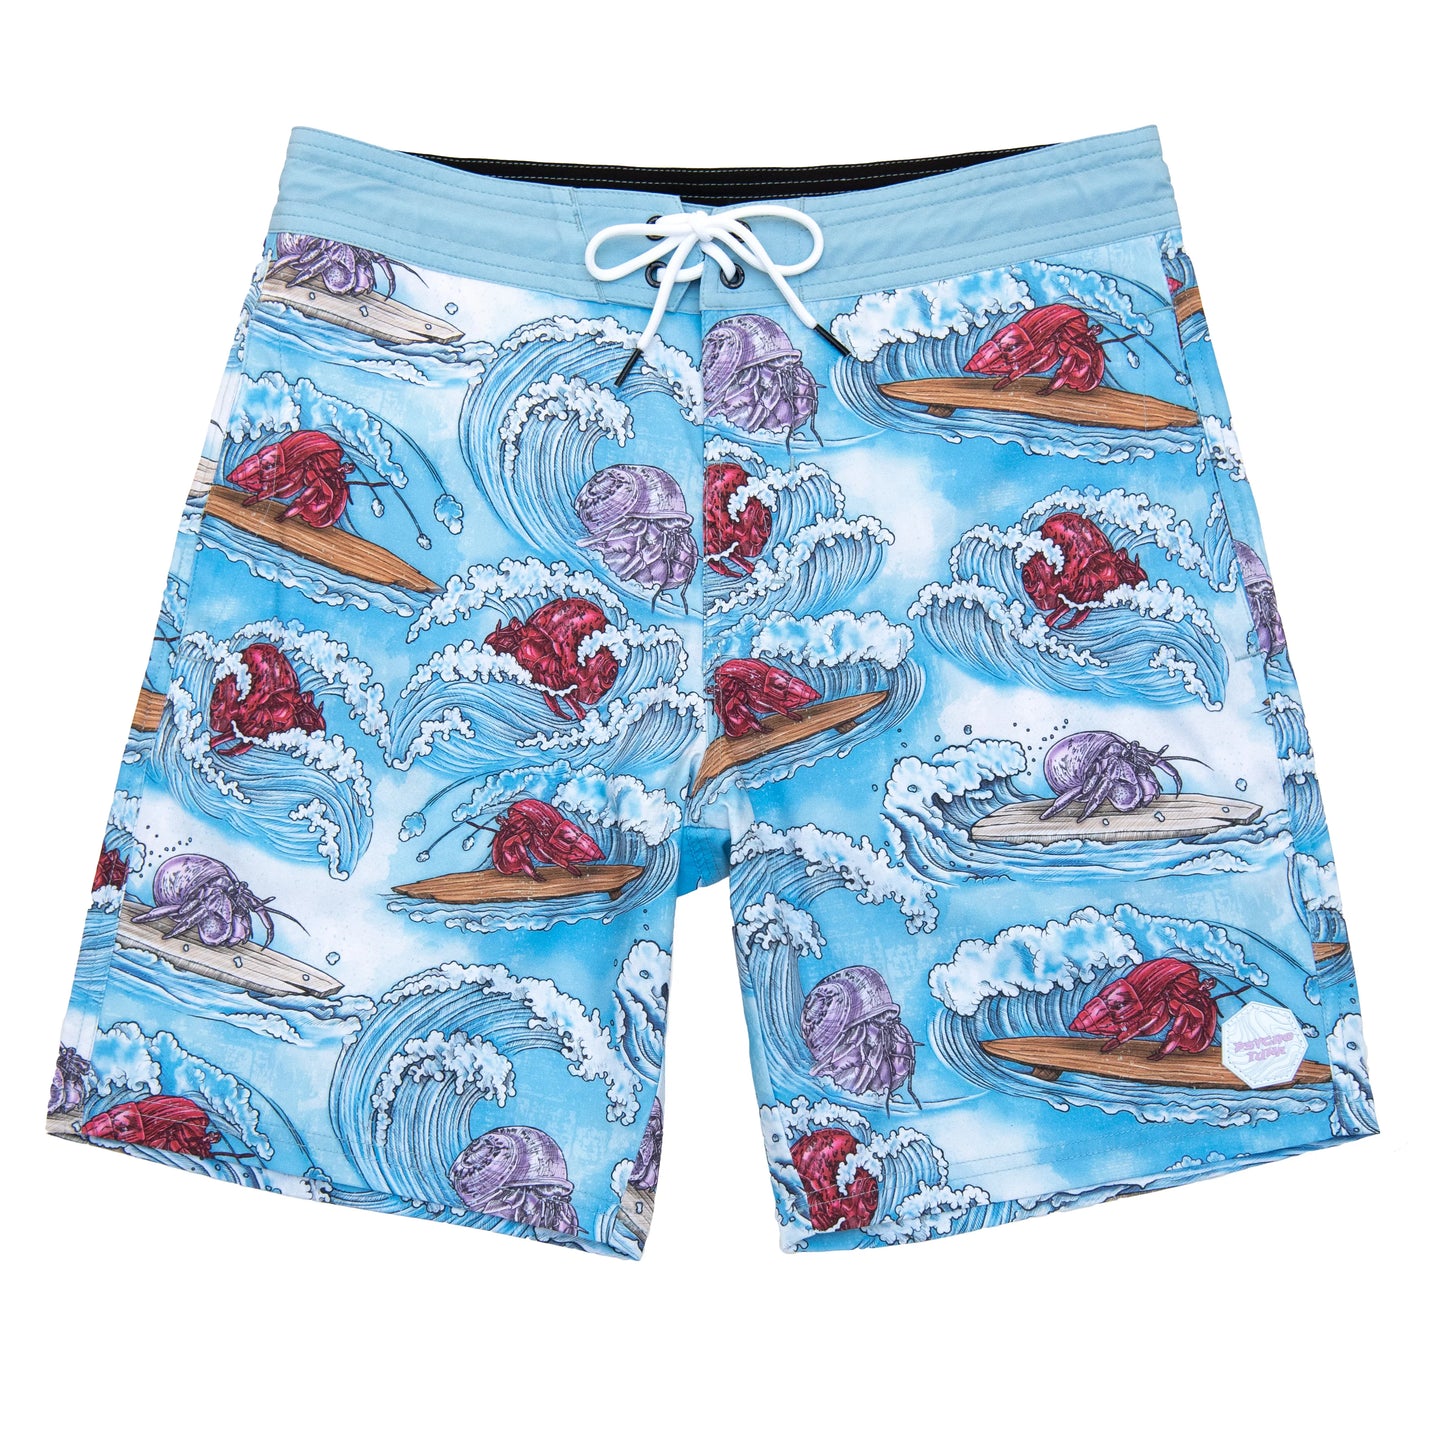 PSYCHO TUNA: Forget me not shorts